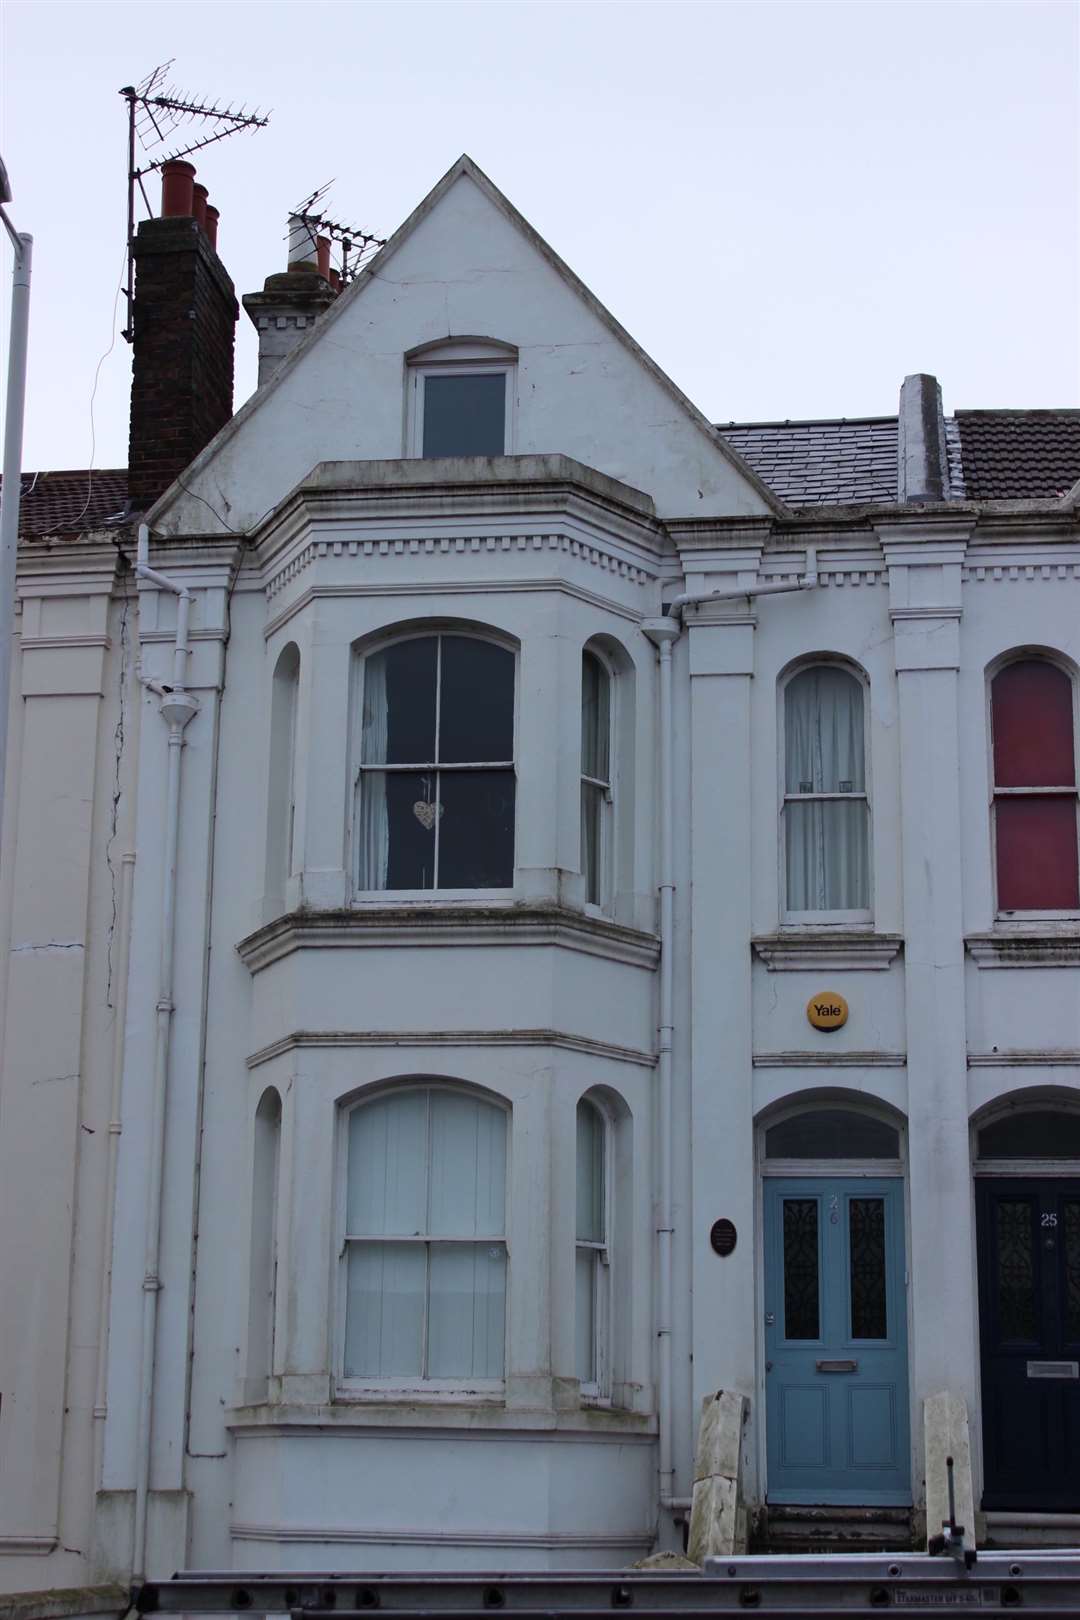 German author Uwe Johnson spent the last 10 years of his life living in Sheerness at 26 Marine Parade